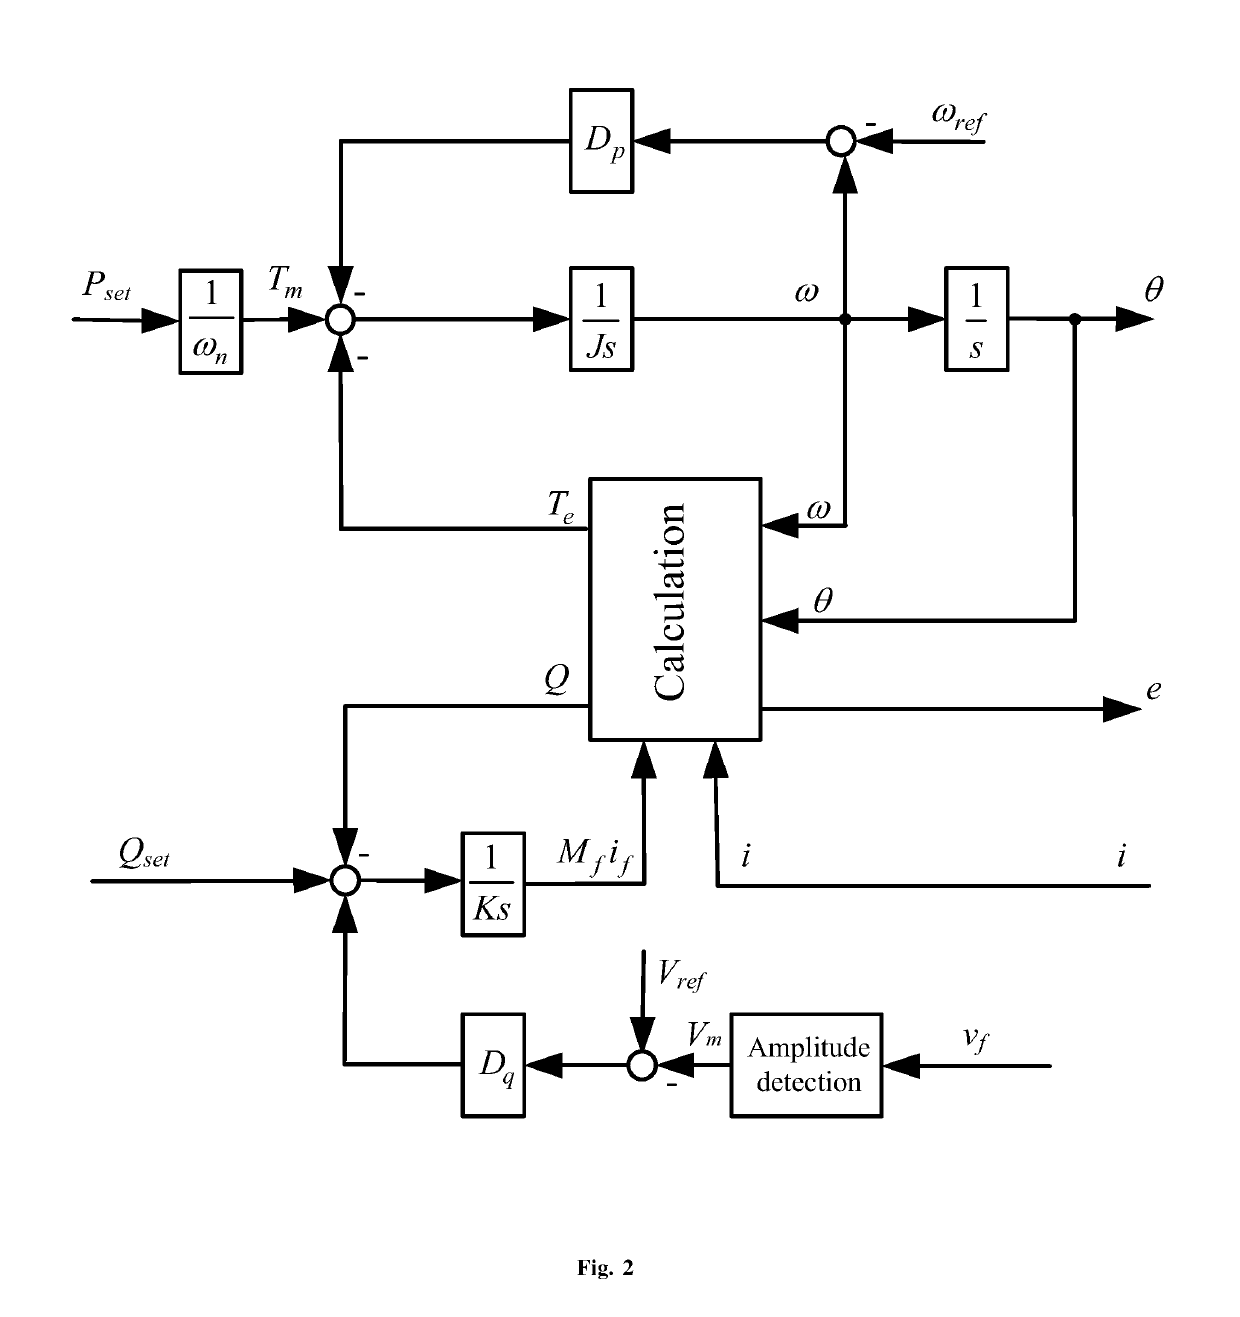 Reconfiguration of Inertia, Damping and Fault Ride-Through for a Virtual Synchronous Machine